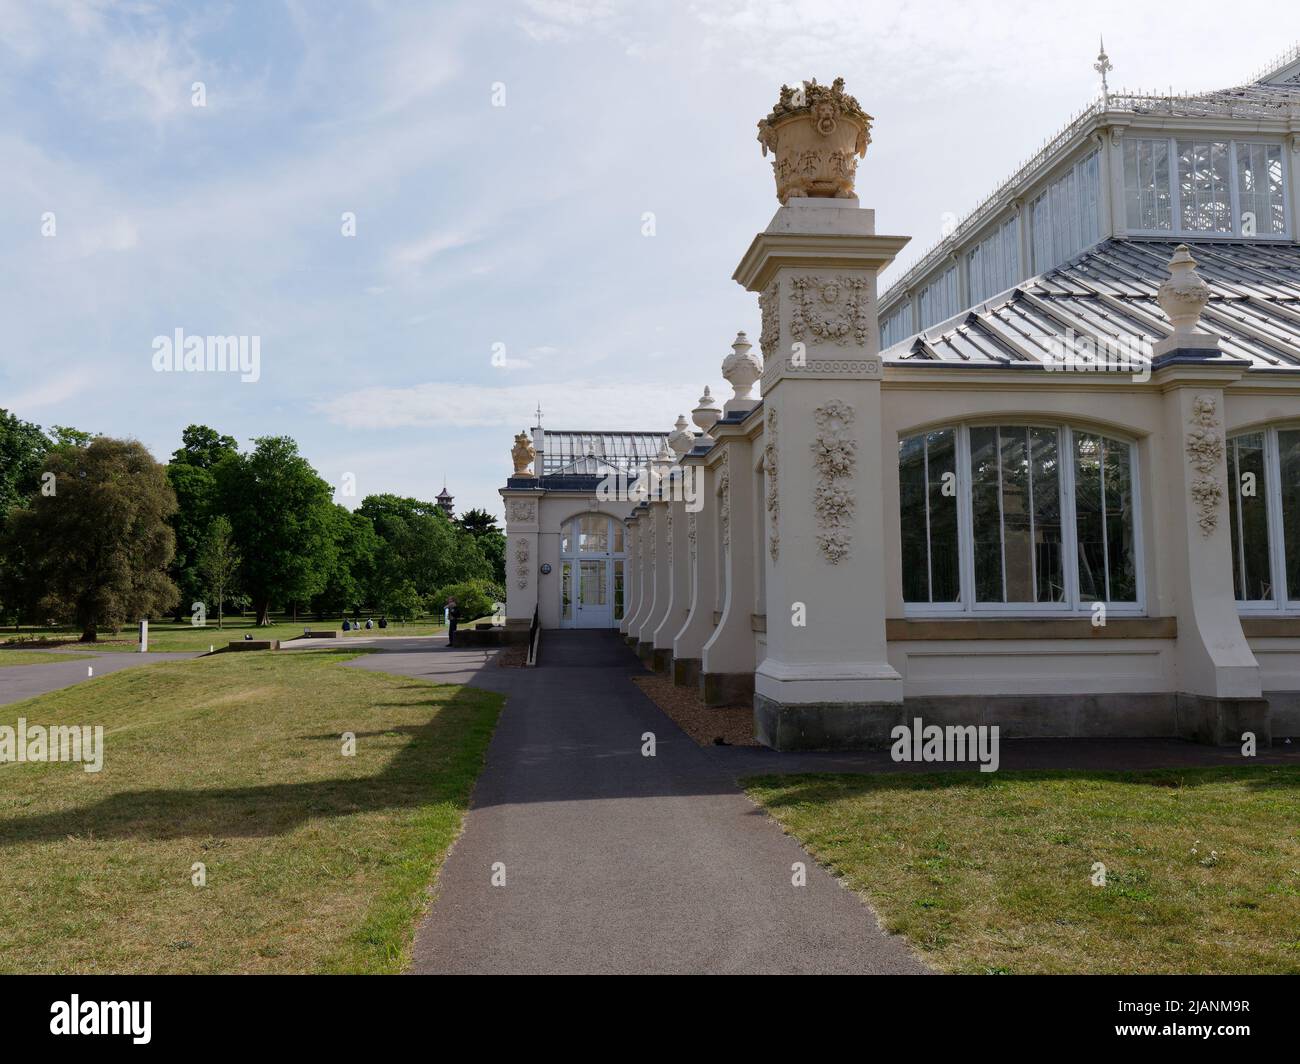 Richmond, Greater London, England, May 18 2022: Royal Botanic Gardens Kew. Side view of the Temperate House set within a lawn and trees. Stock Photo